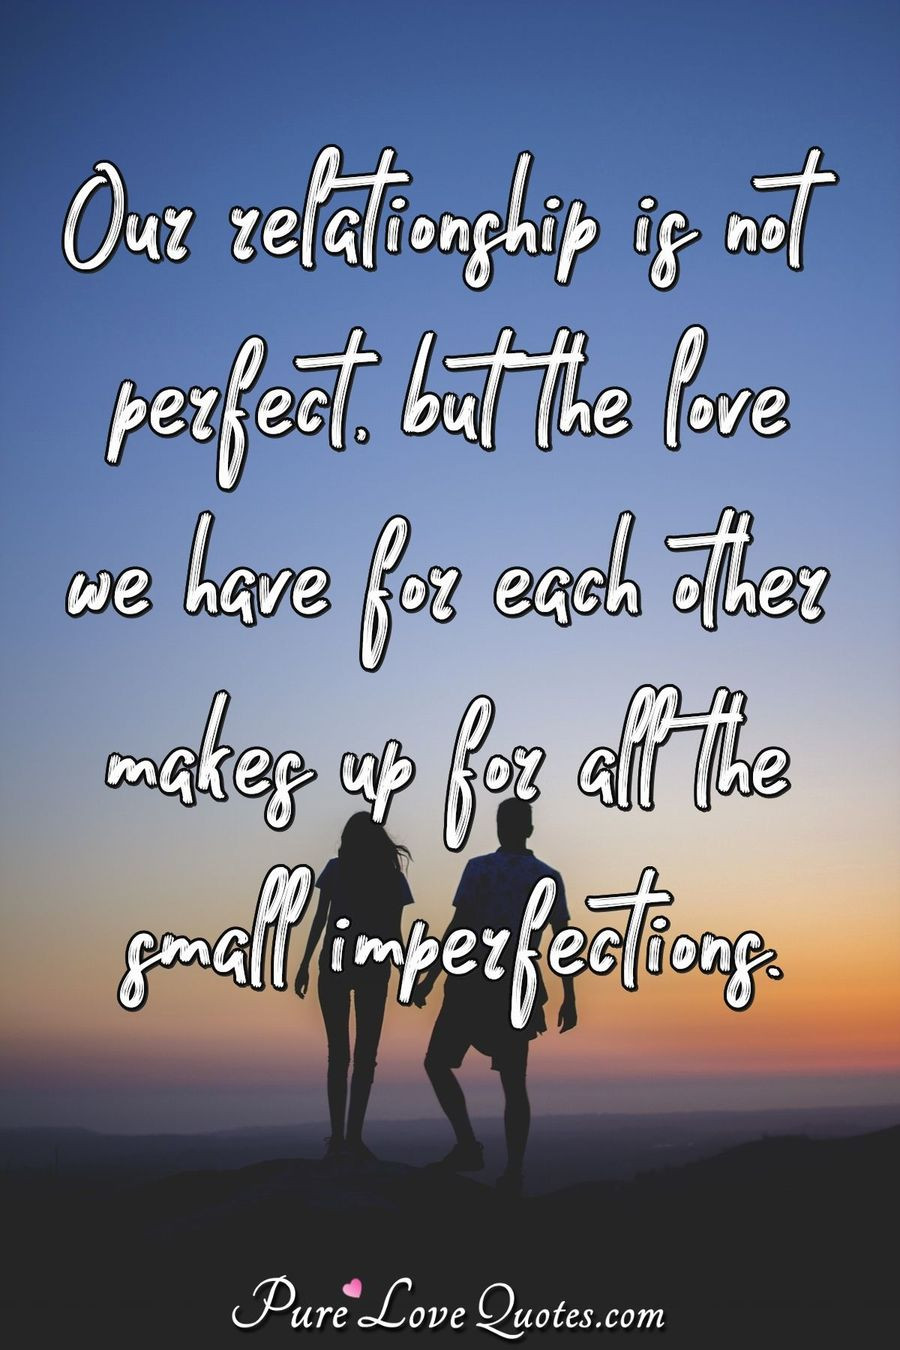 The Perfect Relationship Quotes
 Our relationship is not perfect but the love we have for